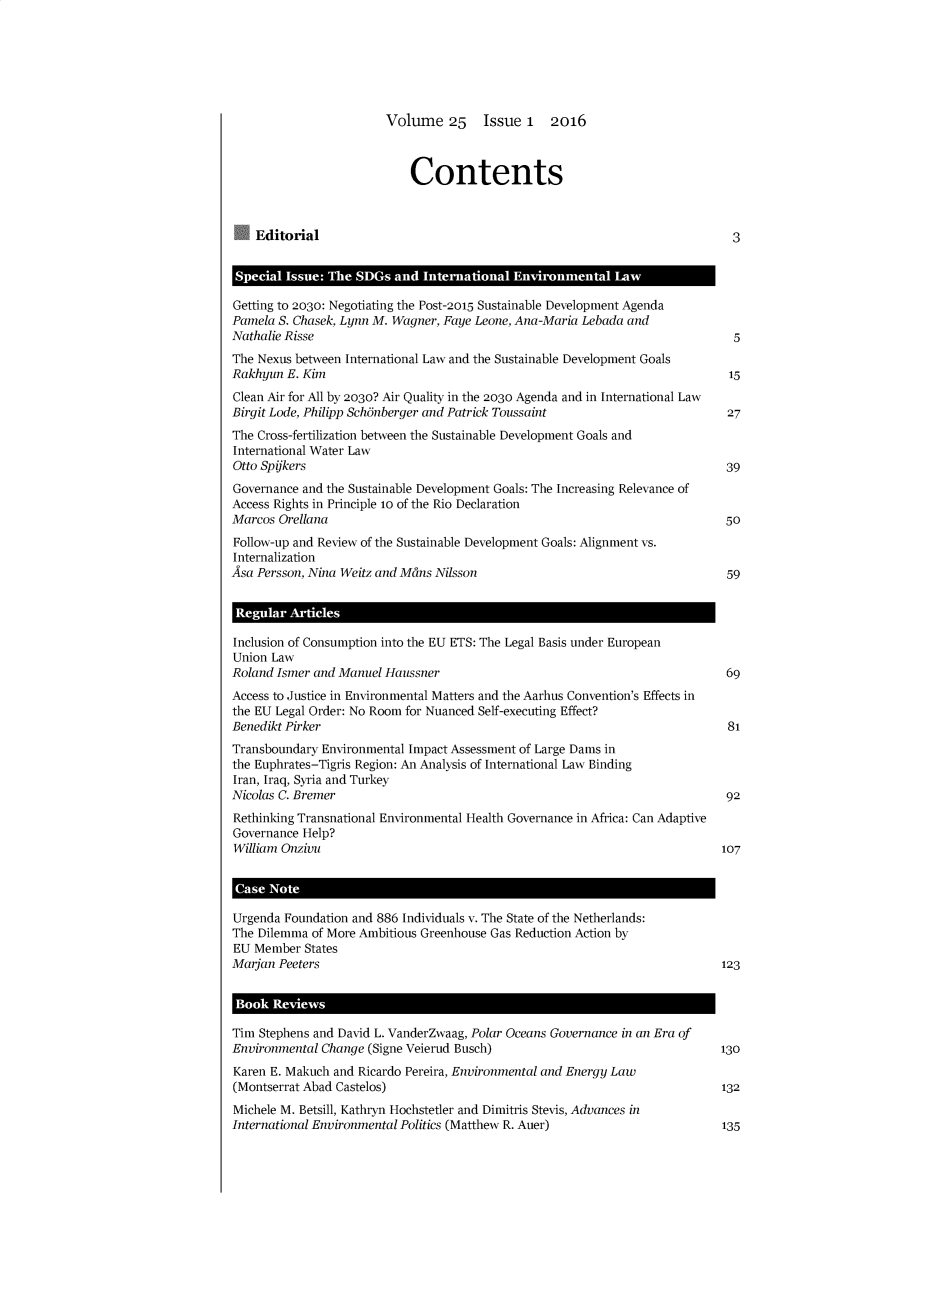 handle is hein.journals/reel25 and id is 1 raw text is: 






Volume 25 Issue 1 2016


                            Contents



    Editorial                                                                3


 Special Issue: The SDGs and  International Environmental  law

 Getting to 2030: Negotiating the Post-2015 Sustainable Development Agenda
 Pamela S. Chasek, Lynn M. Wagner, Faye Leone, Ana-Maria Lebada and
 Nathalie Risse                                                              5
 The Nexus between International Law and the Sustainable Development Goals
 Rakhyun E. Kim                                                              15
 Clean Air for All by 2030? Air Quality in the 2030 Agenda and in International Law
 Birgit Lode, Philipp Sch5nberger and Patrick Toussaint                     27
 The Cross-fertilization between the Sustainable Development Goals and
 International Water Law
 Otto Spijkers                                                              39
 Governance and the Sustainable Development Goals: The Increasing Relevance of
 Access Rights in Principle 1o of the Rio Declaration
 Marcos Orellana                                                            50
 Follow-up and Review of the Sustainable Development Goals: Alignment vs.
 Internalization
Asa Persson, Nina Weitz and Mans Nilsson                                    59


Regular  Articles

Inclusion of Consumption into the EU ETS: The Legal Basis under European
Union Law
Roland Ismer and Manuel Haussner                                            69
Access to Justice in Environmental Matters and the Aarhus Convention's Effects in
the EU Legal Order: No Room for Nuanced Self-executing Effect?
Benedikt Pirker                                                             81
Transboundary Environmental Impact Assessment of Large Dams in
the Euphrates-Tigris Region: An Analysis of International Law Binding
Iran, Iraq, Syria and Turkey
Nicolas C. Bremer                                                           92
Rethinking Transnational Environmental Health Governance in Africa: Can Adaptive
Governance Help?
William Onzivu                                                             107




Urgenda Foundation and 886 Individuals v. The State of the Netherlands:
The Dilemma of More Ambitious Greenhouse Gas Reduction Action by
EU  Member States
Marjan Peeters                                                             123


Book  Reviews

Tim Stephens and David L. VanderZwaag, Polar Oceans Governance in an Era of
Environmental Change (Signe Veierud Busch)                                 130
Karen E. Makuch and Ricardo Pereira, Environmental and Energy Law
(Montserrat Abad Castelos)                                                 132
Michele M. Betsill, Kathryn Hochstetler and Dimitris Stevis, Advances in
International Environmental Politics (Matthew R. Auer)                      135


